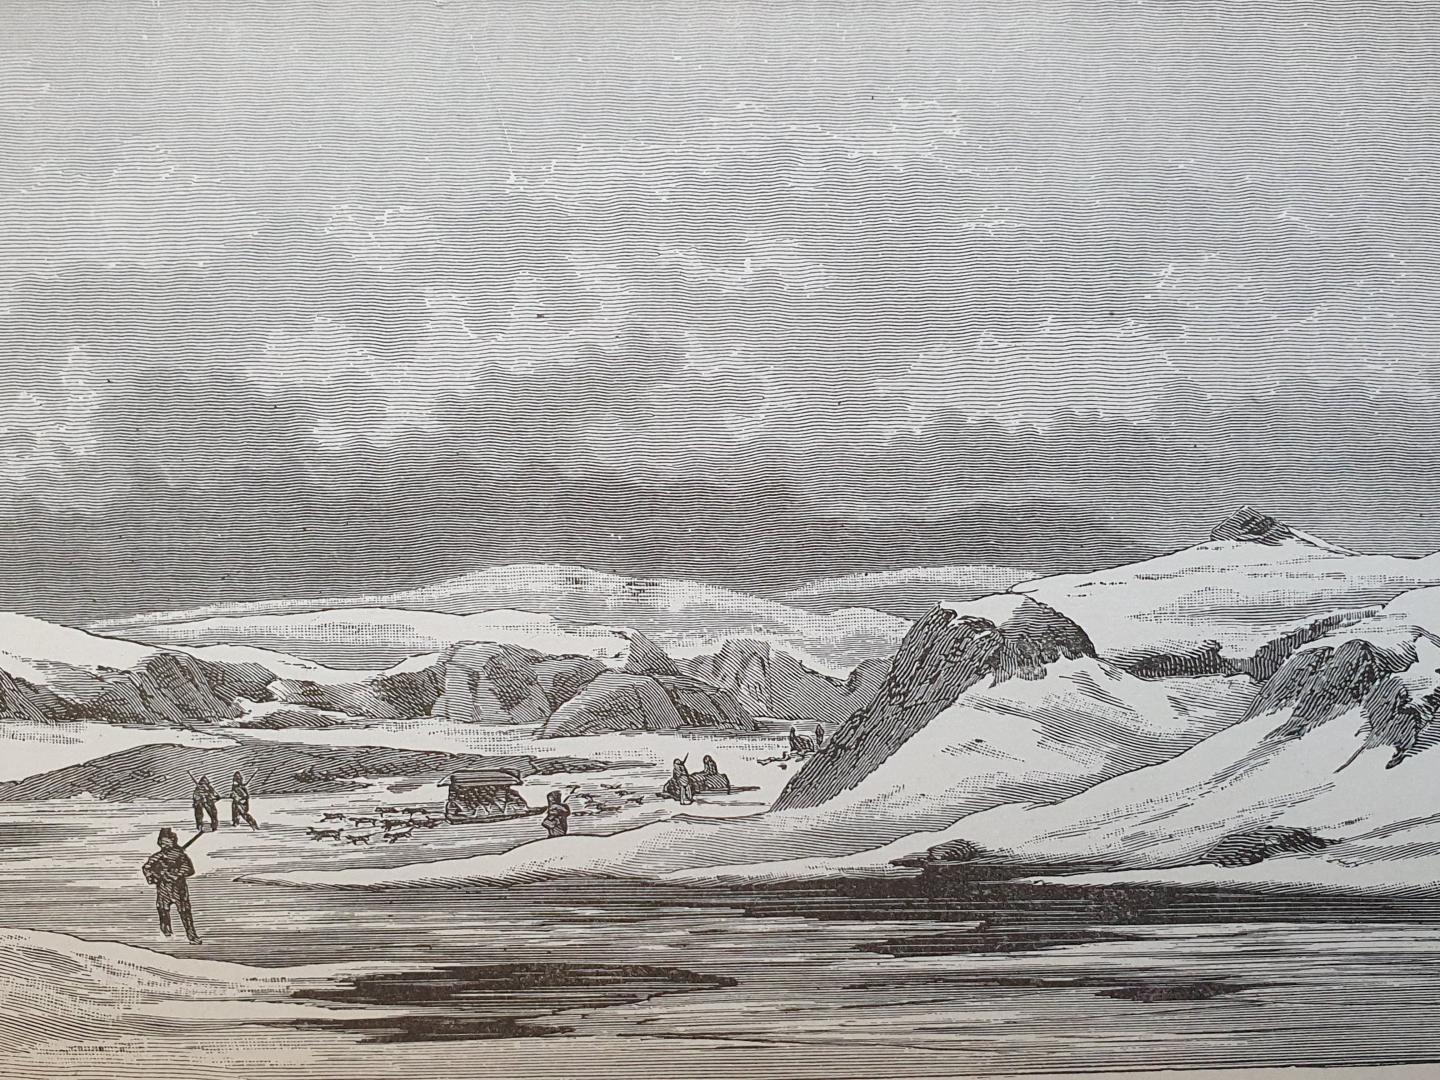 William H. Gilder - Schwatka's search. Sledging in the Arctic in quest of the Franklin records